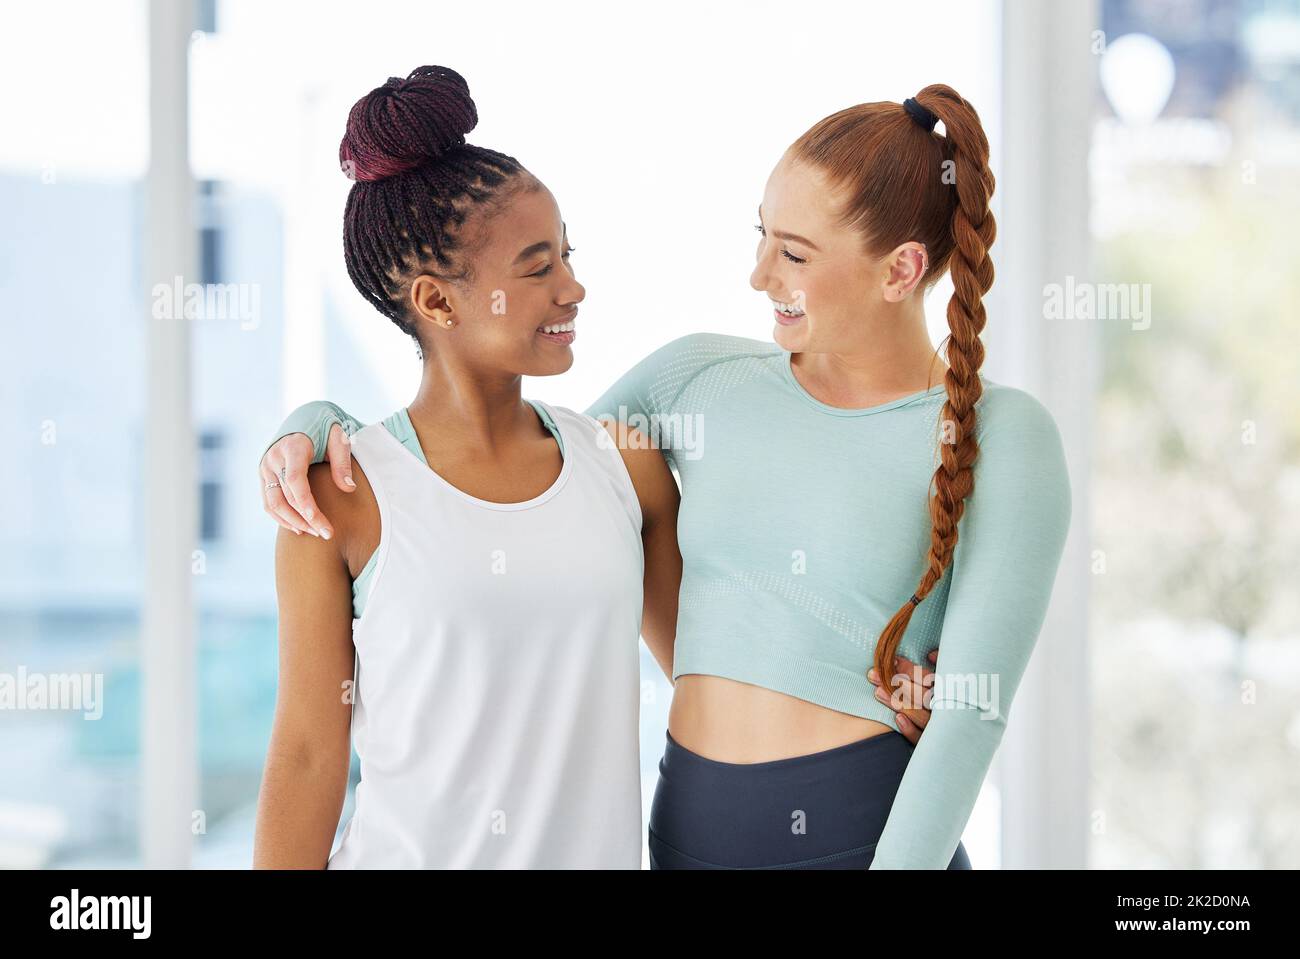 Friends who do yoga together stick together. Shot of two young women standing close together after practising yoga. Stock Photo